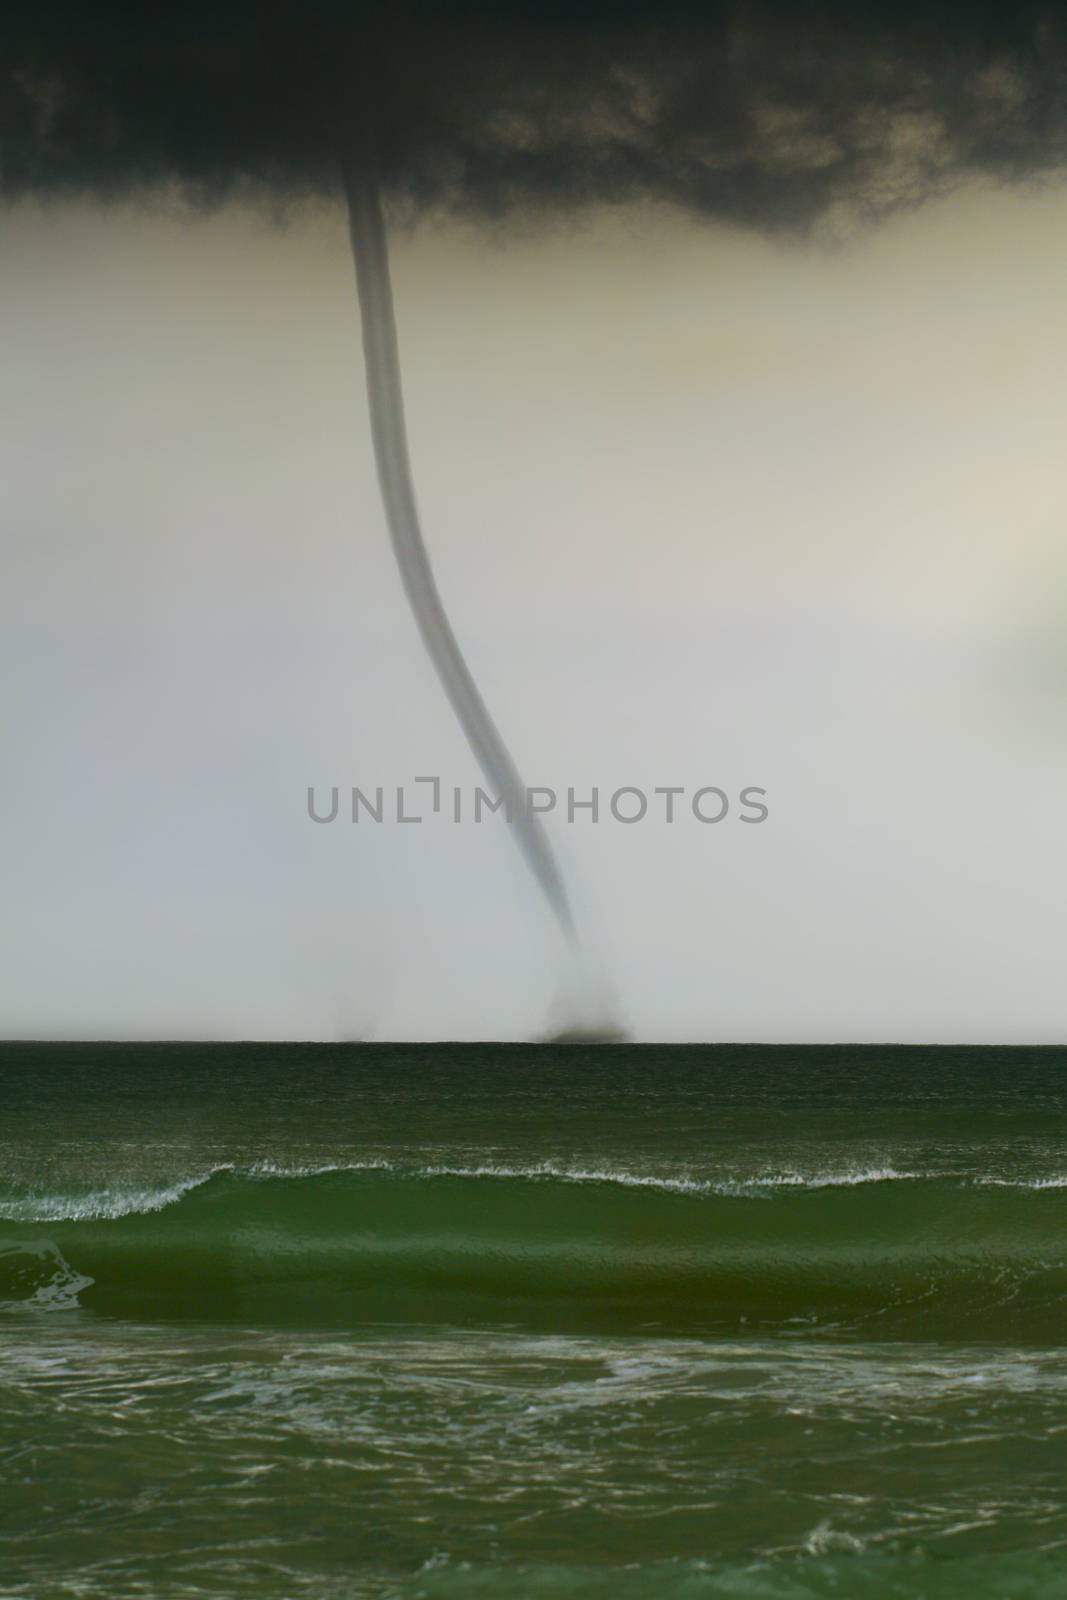 bad weather and storm with the wind on the sea. tornado over the ocean, nature force background - huge tornado, bright lightning in dark stormy sky